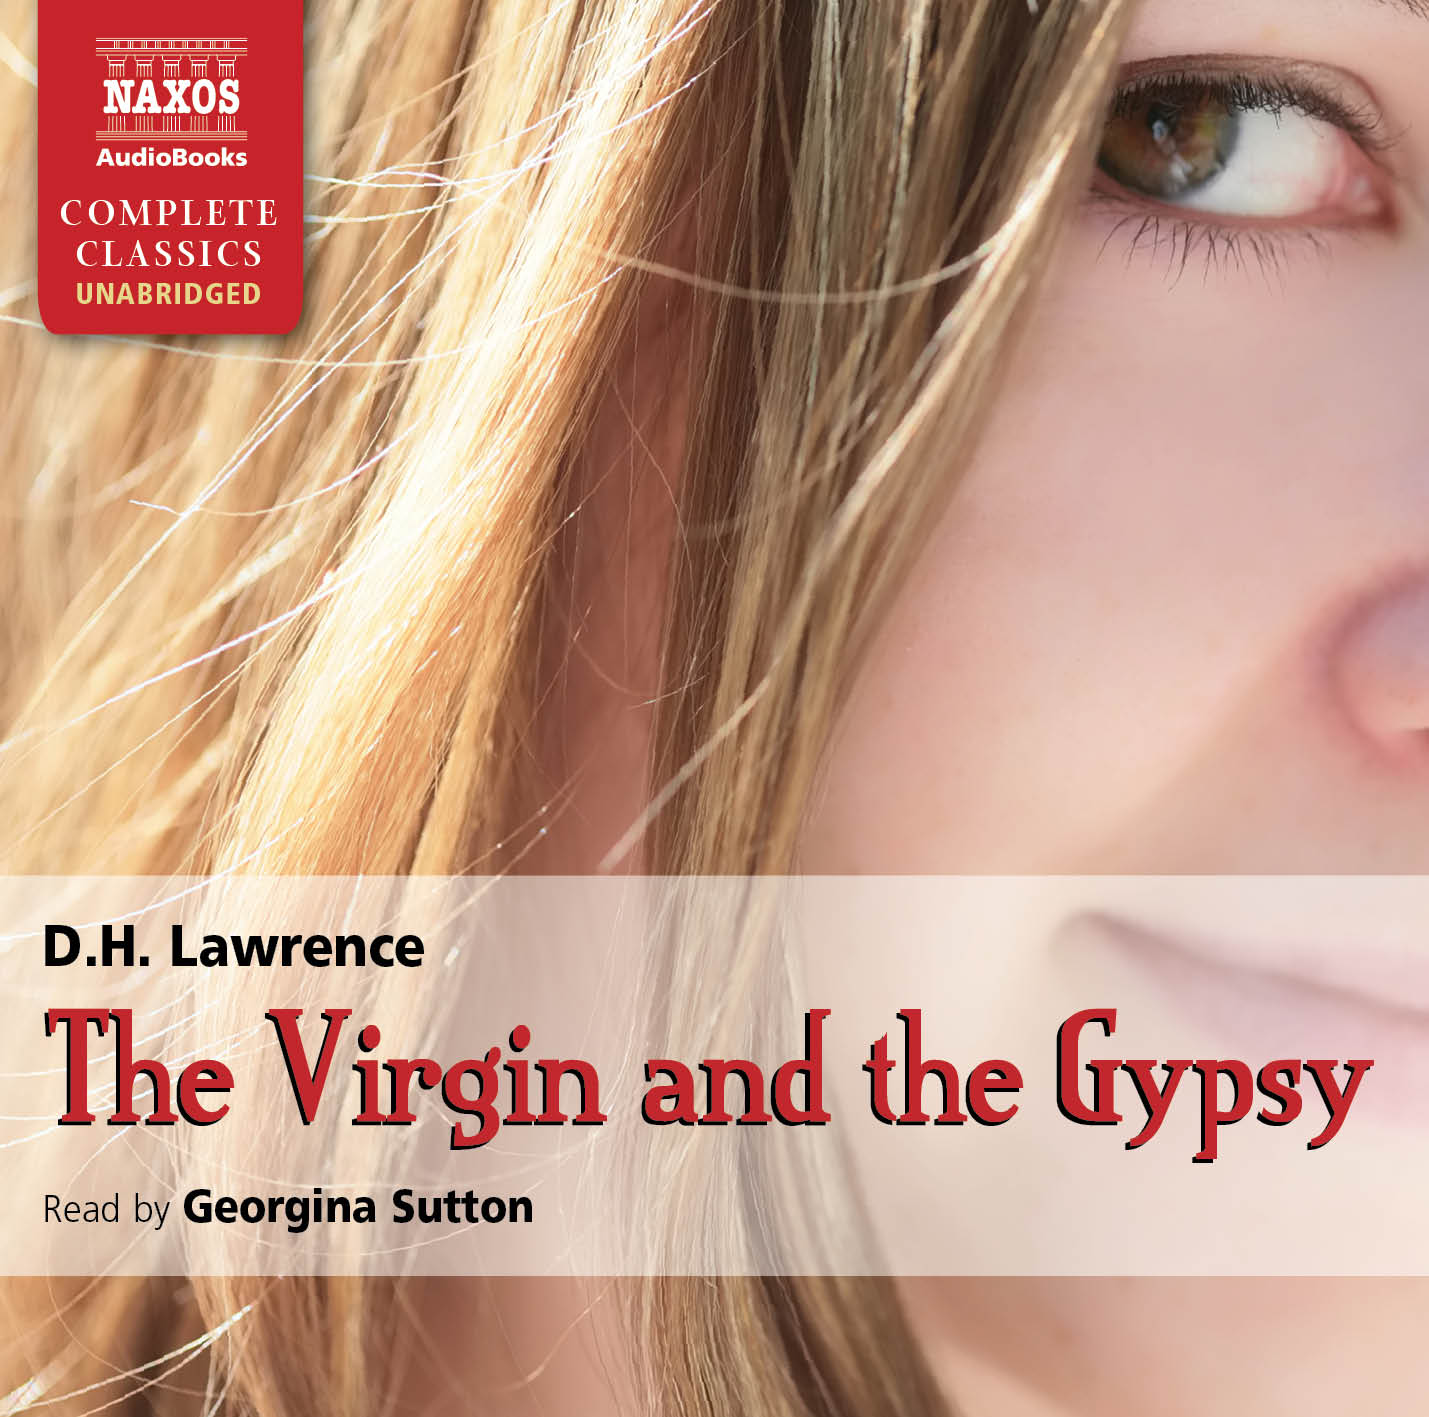 The Virgin and the Gypsy: DH Lawrence